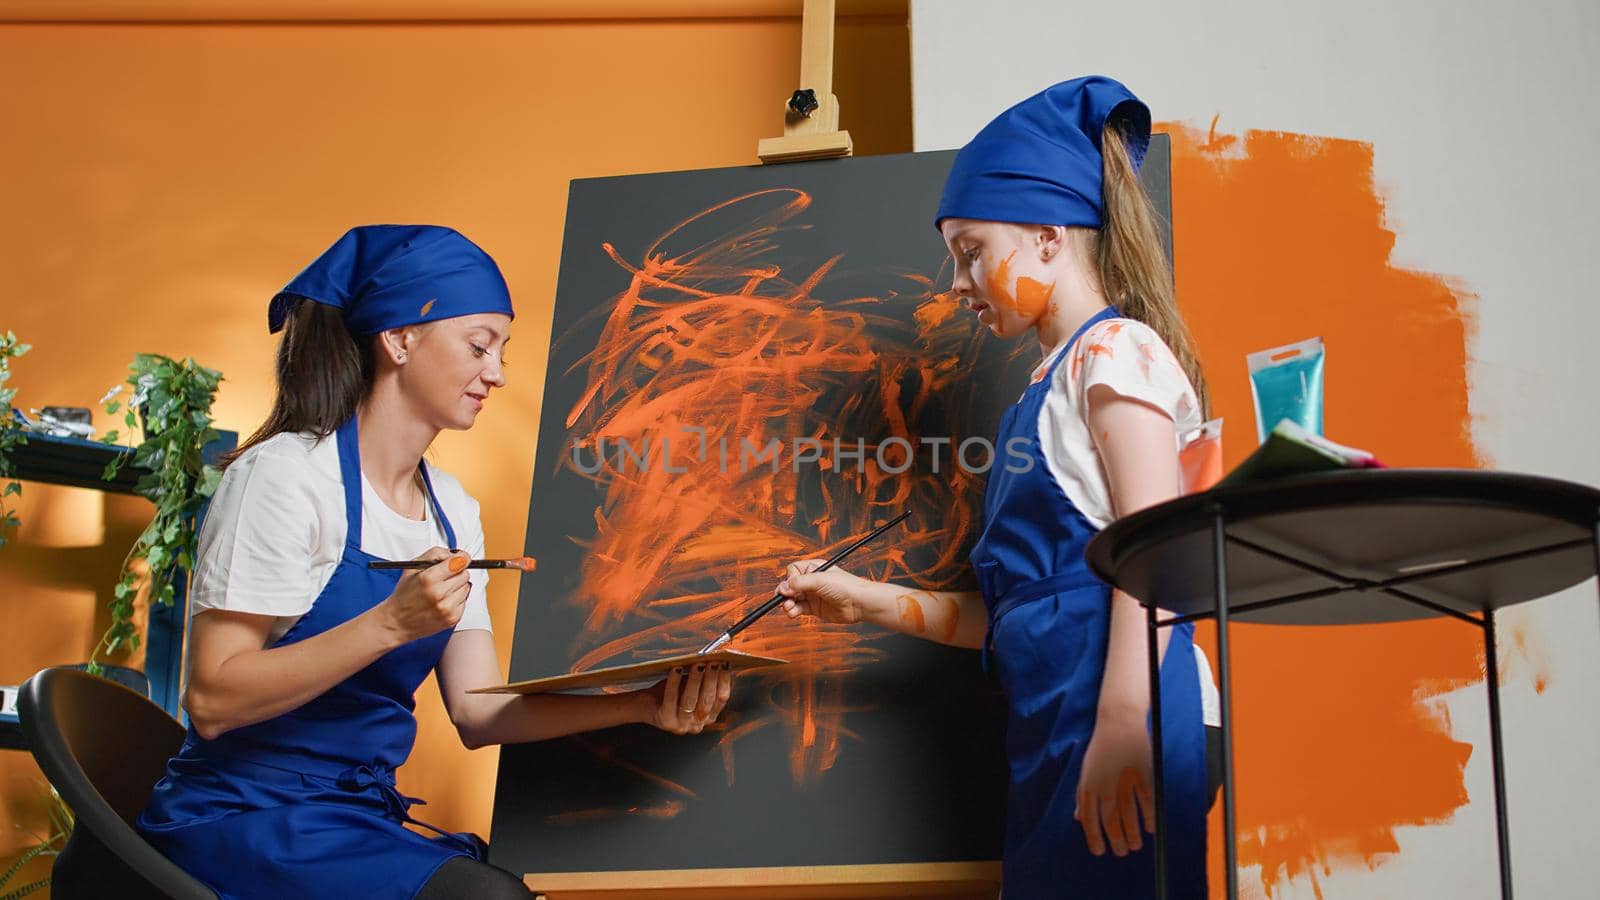 Small family painting artwork design with aquarelle on canvas, holding paintbrush with orange color to create masterpiece. Learning to create artistic model inspiration with dye. Tripod shot.